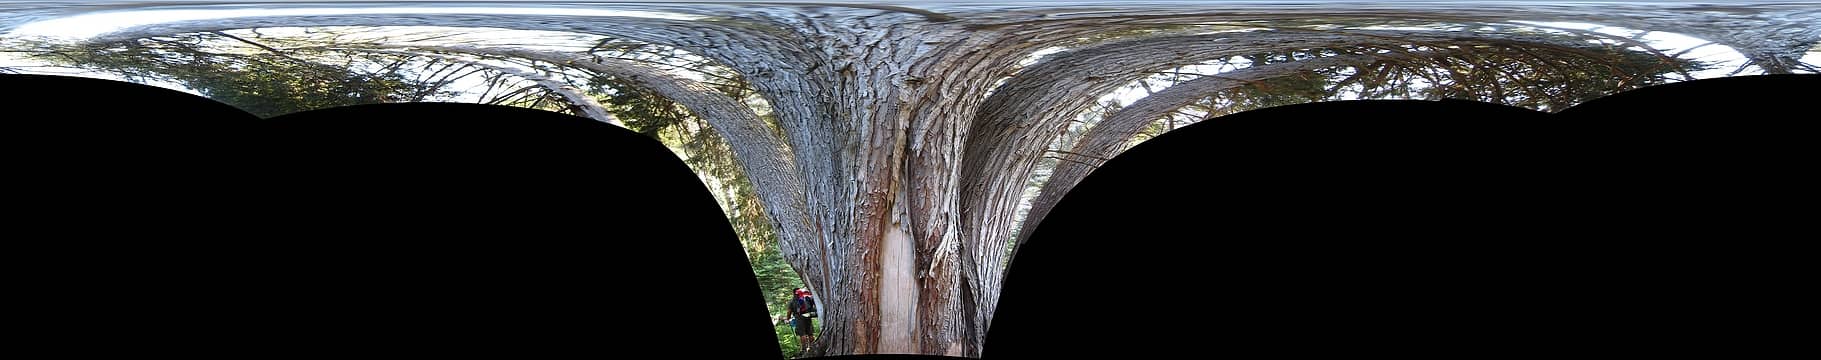 Abstract of Tanner and the massive six-trunked evergreen.   Dosewallips River Valley, Olympic National Park, Washington.